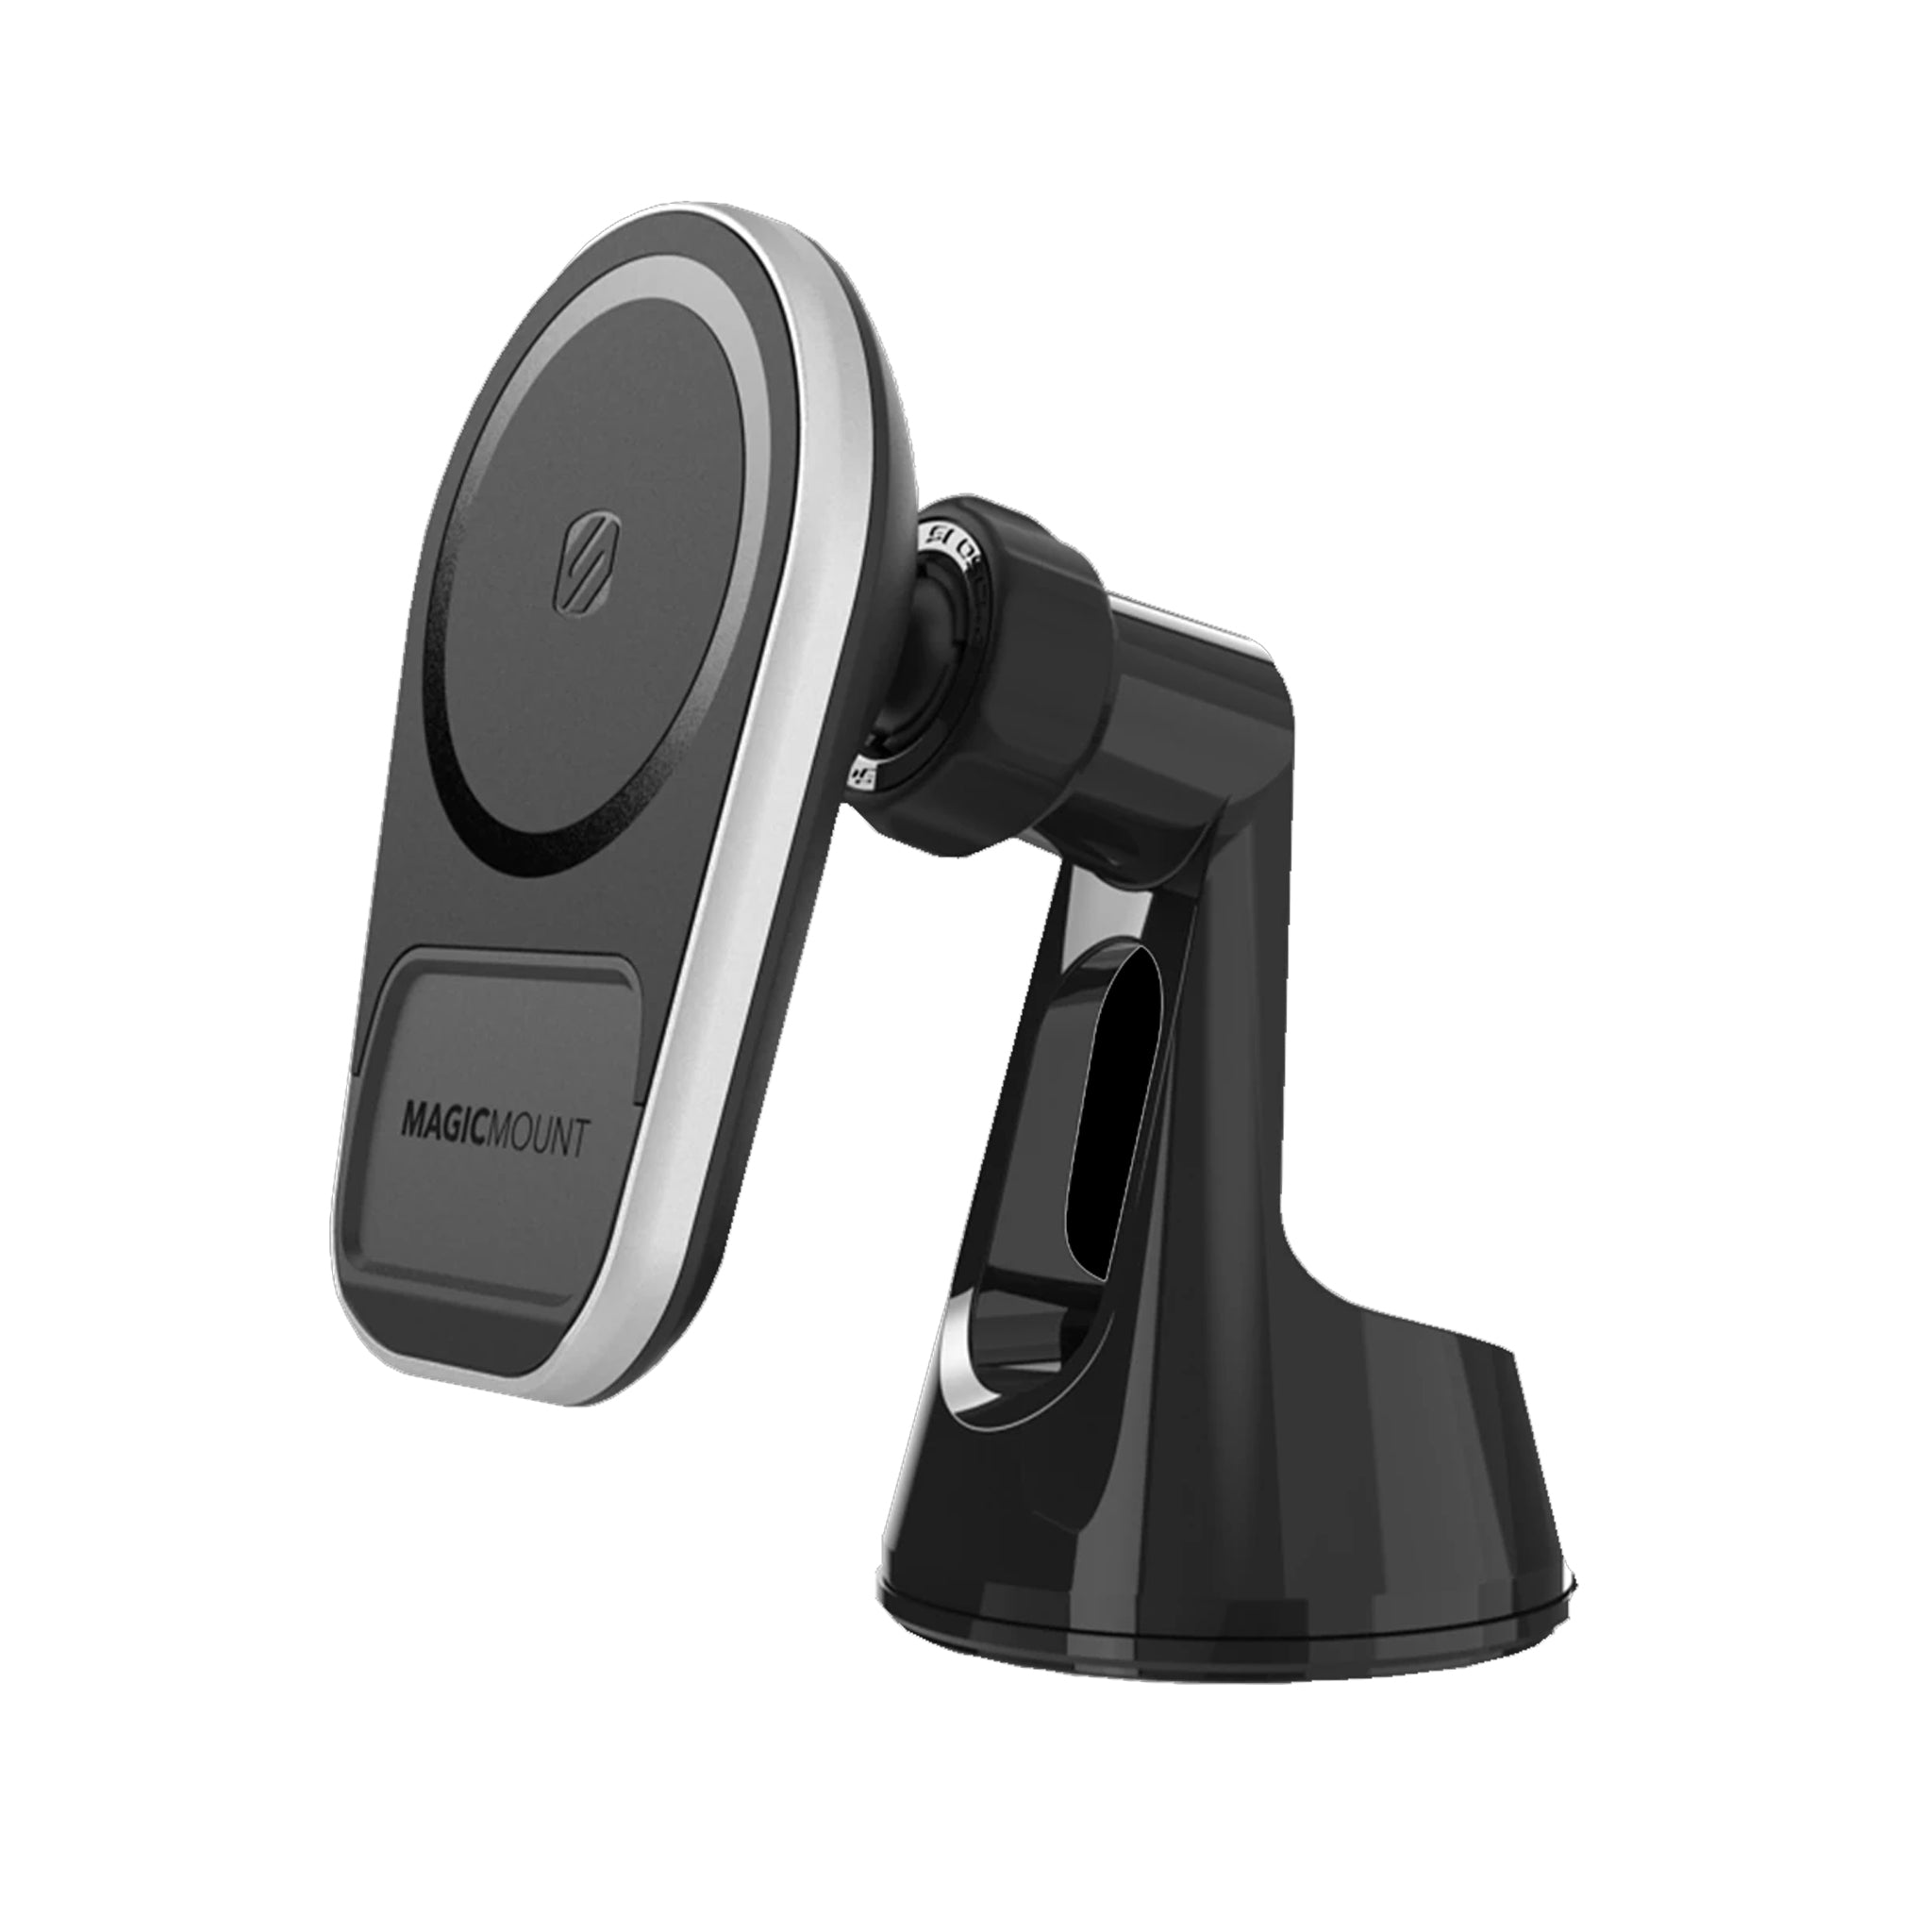 Scosche - Magicmount Pro Charge5 Wireless Charging Dash / Window Mount - Black And Silver